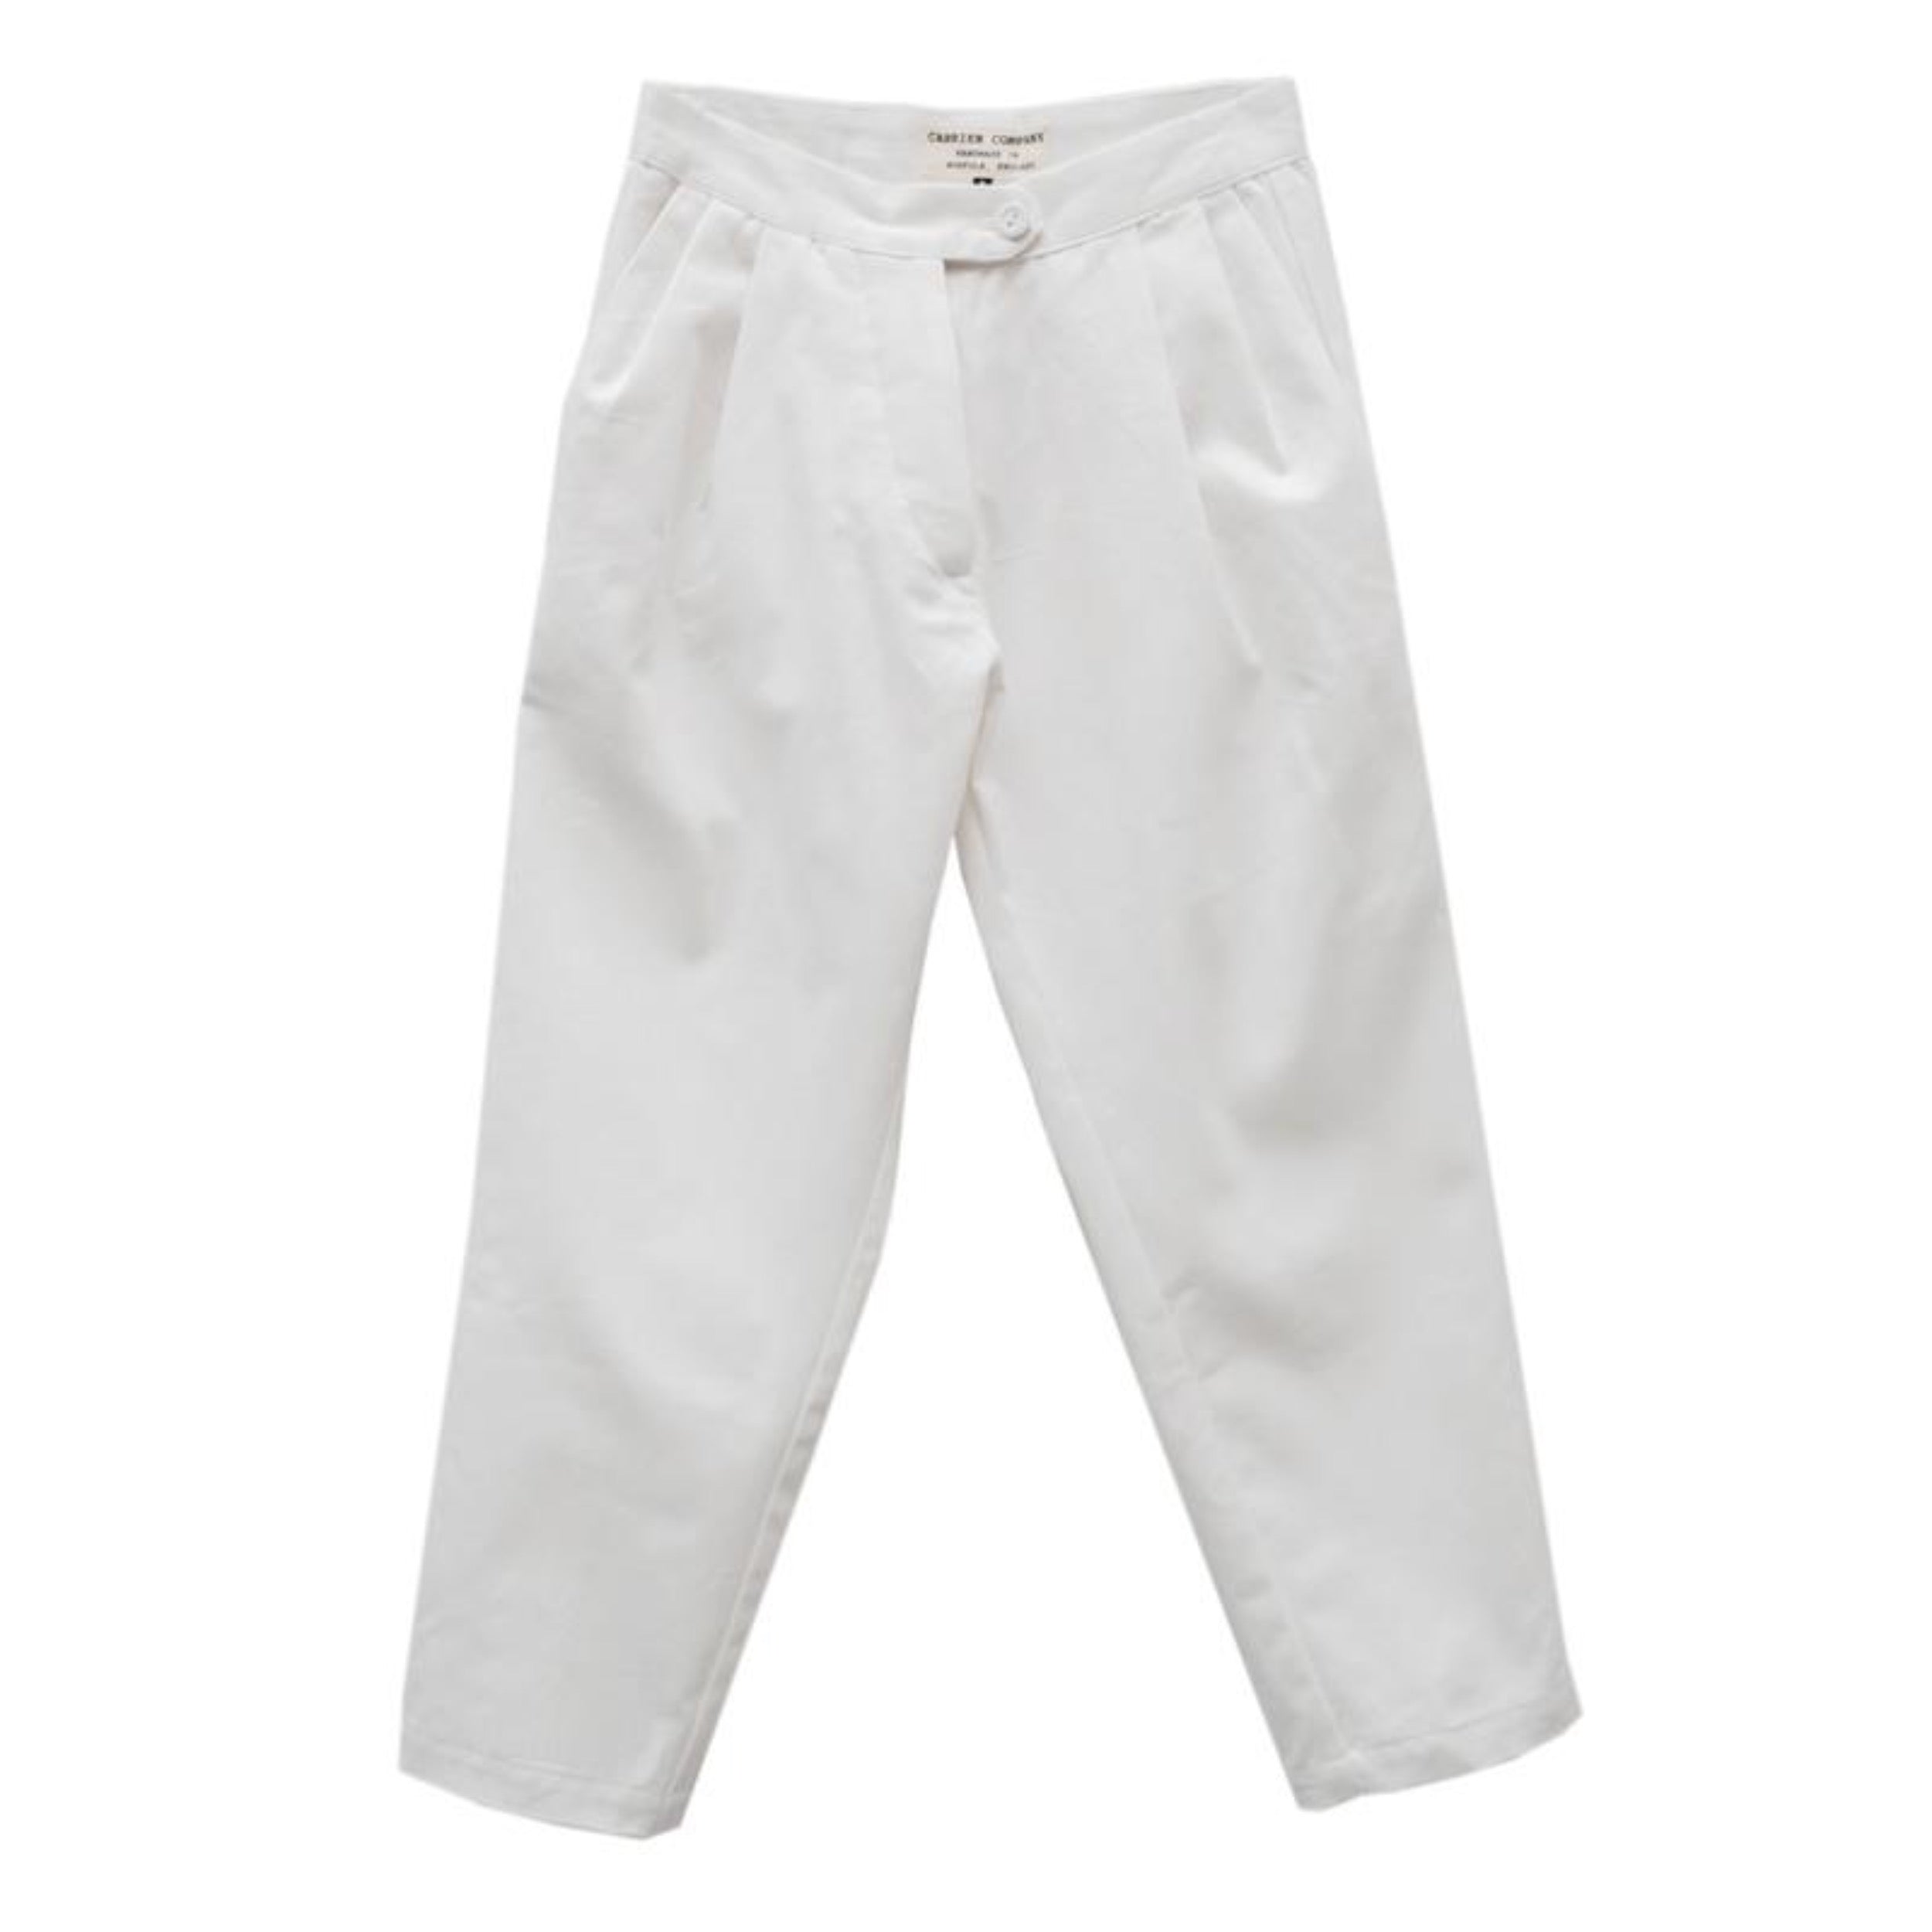 Carrier Company Cropped Trouser in White